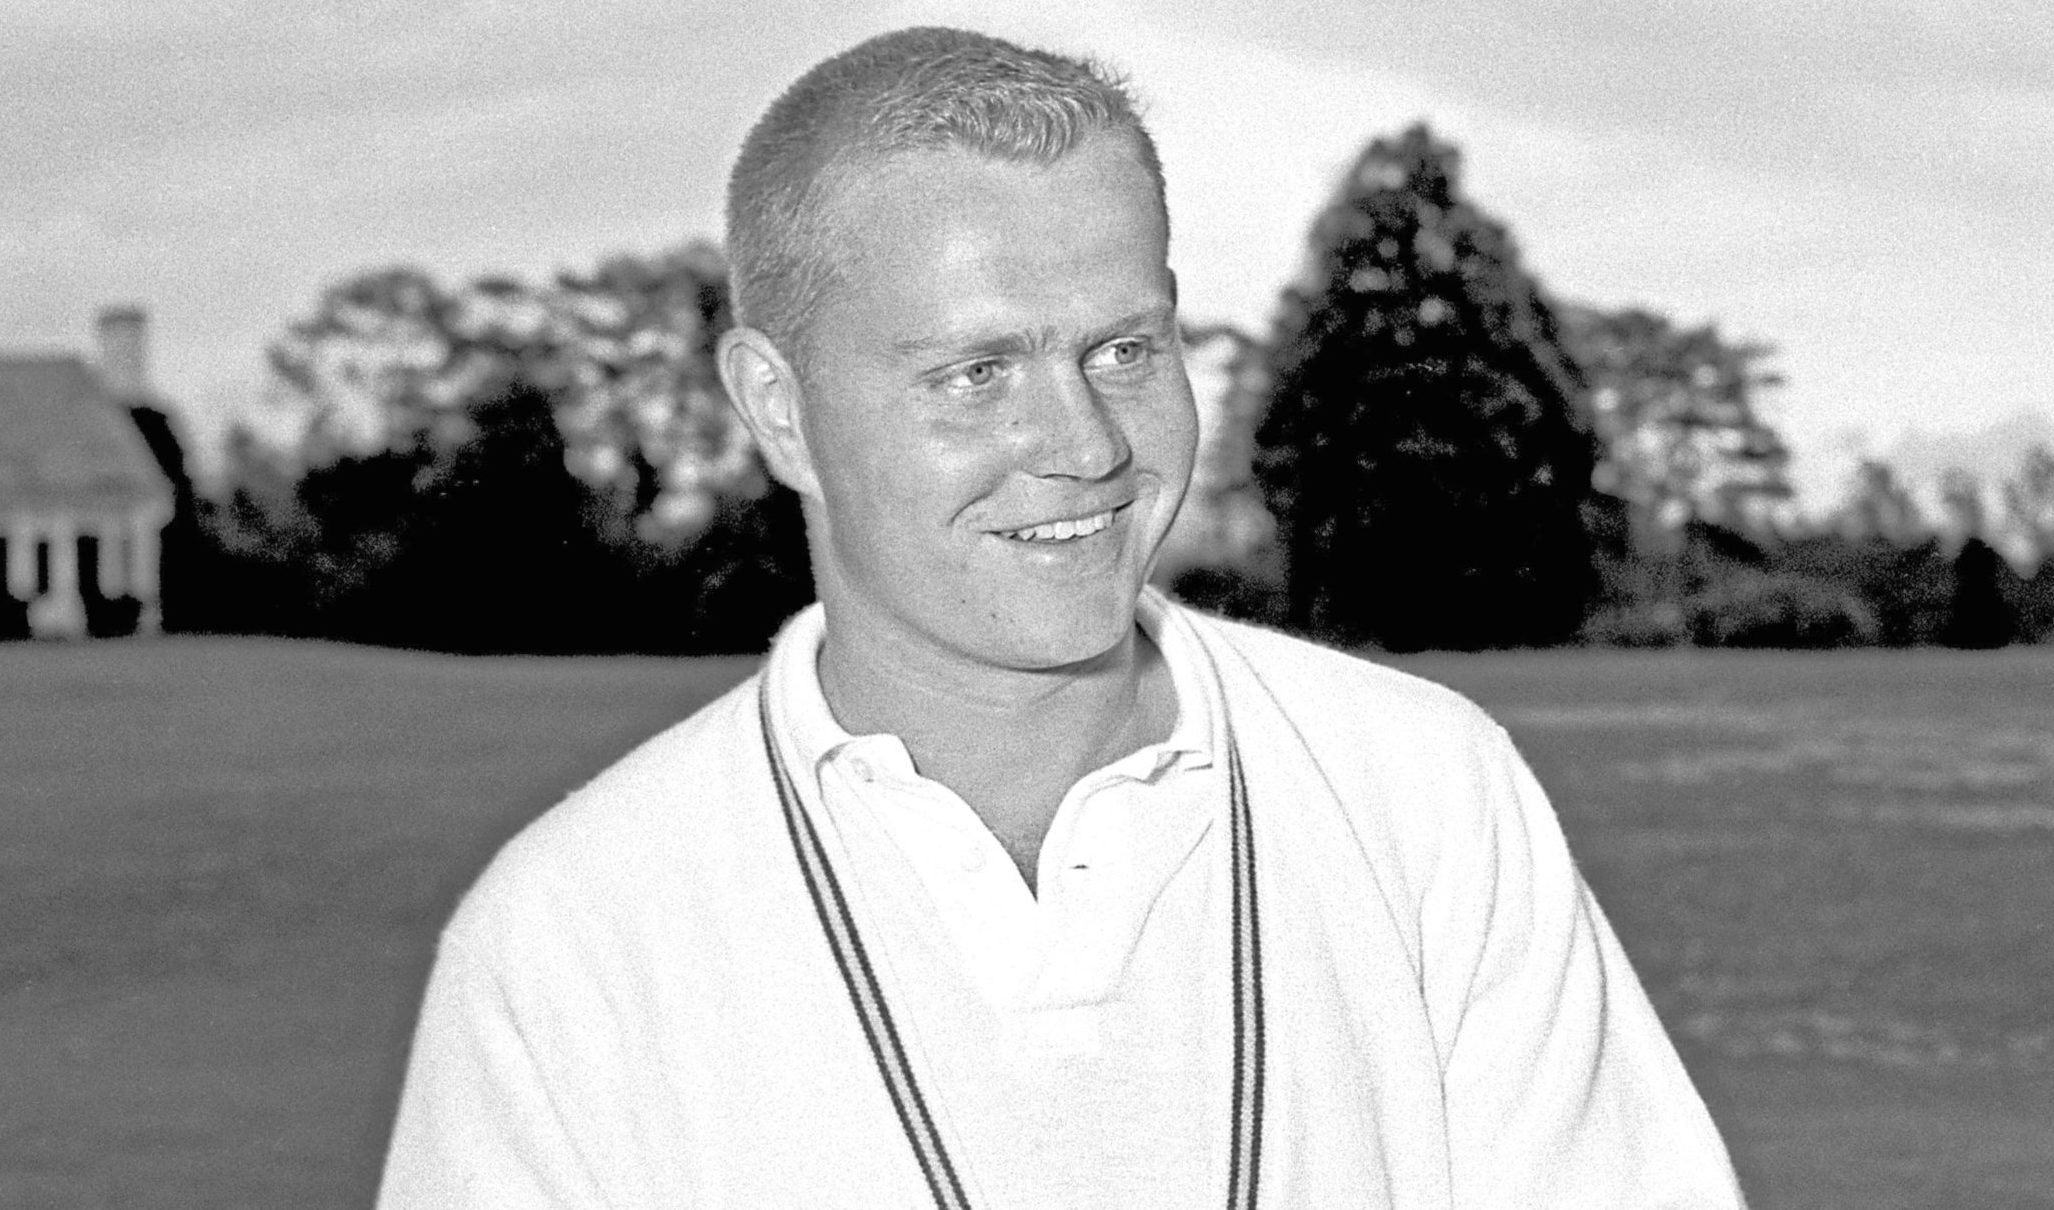 Jack Nicklaus playing as an amateur during the 1959 Masters Tournament